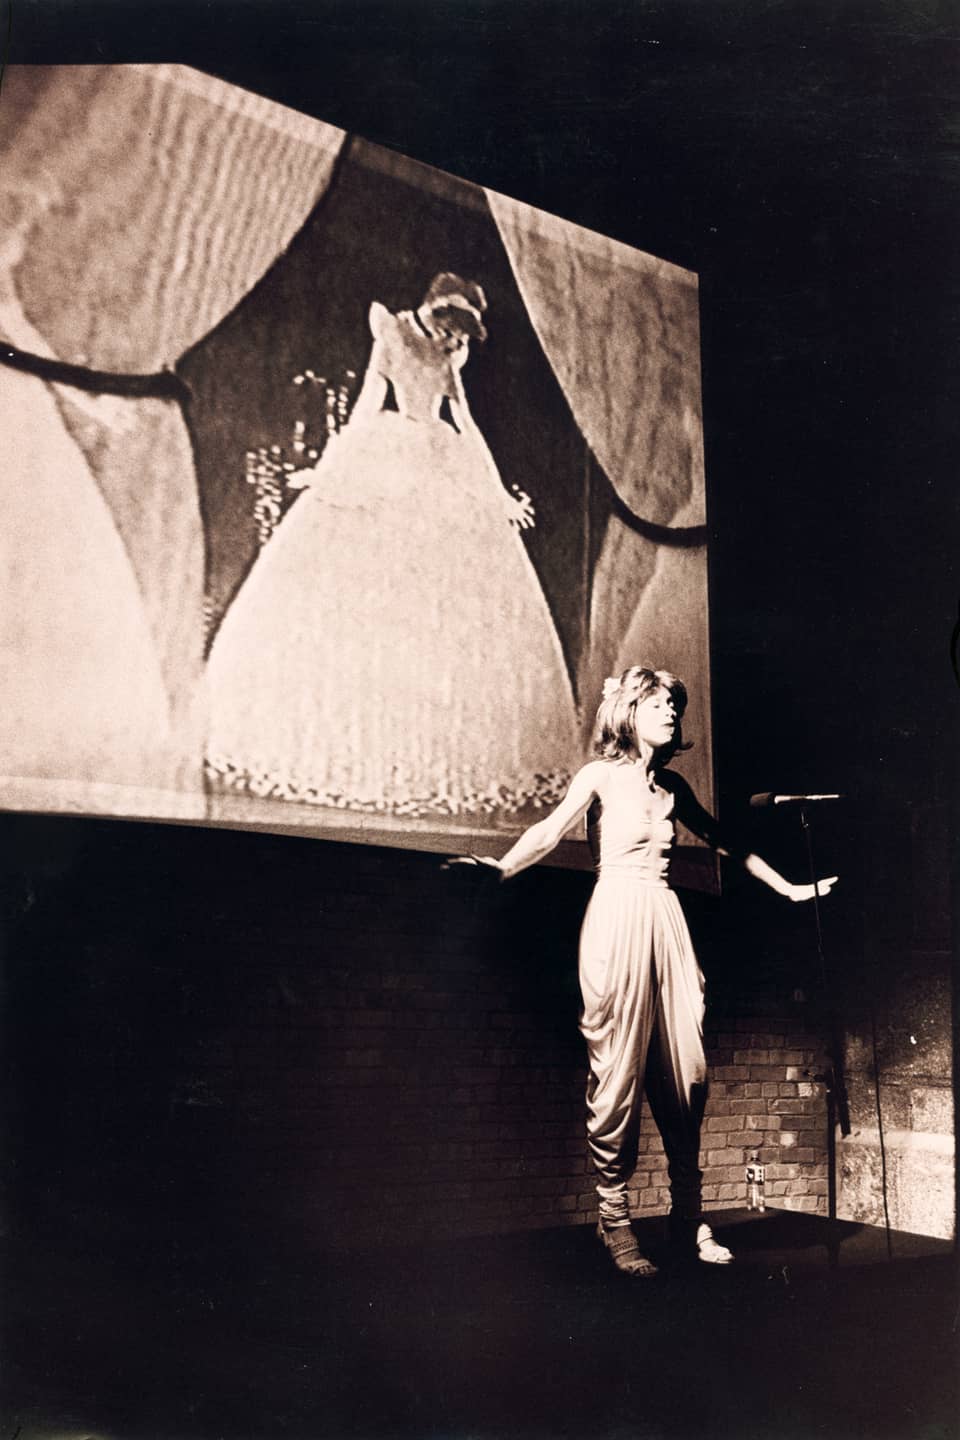 A woman performs on stage in front of a projection of Disney’s Cinderella